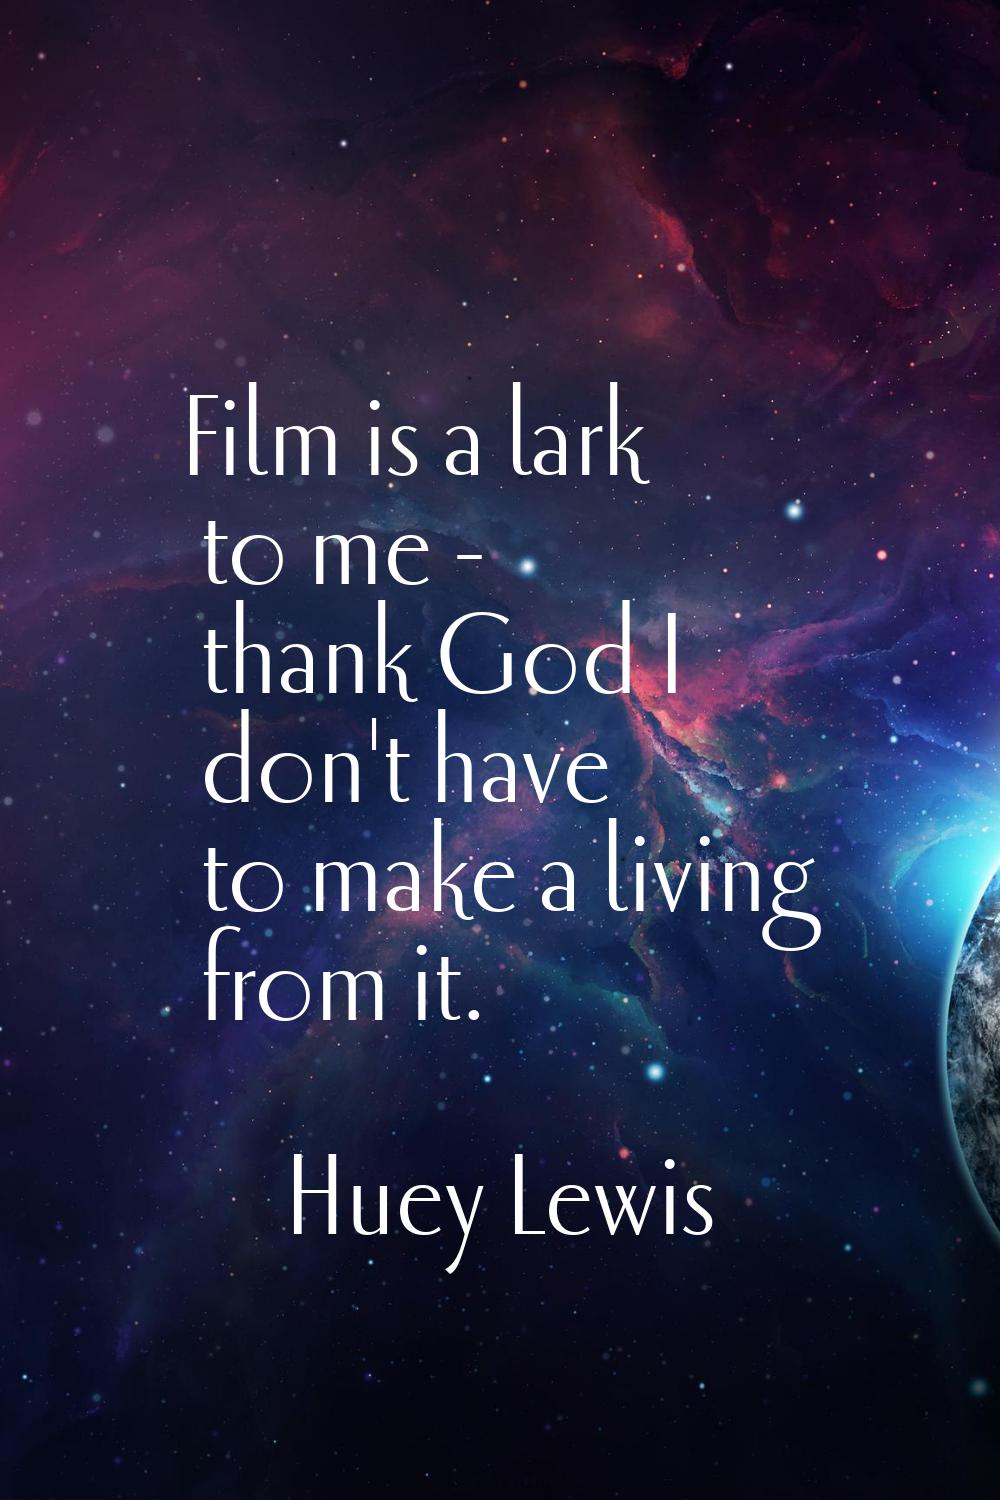 Film is a lark to me - thank God I don't have to make a living from it.